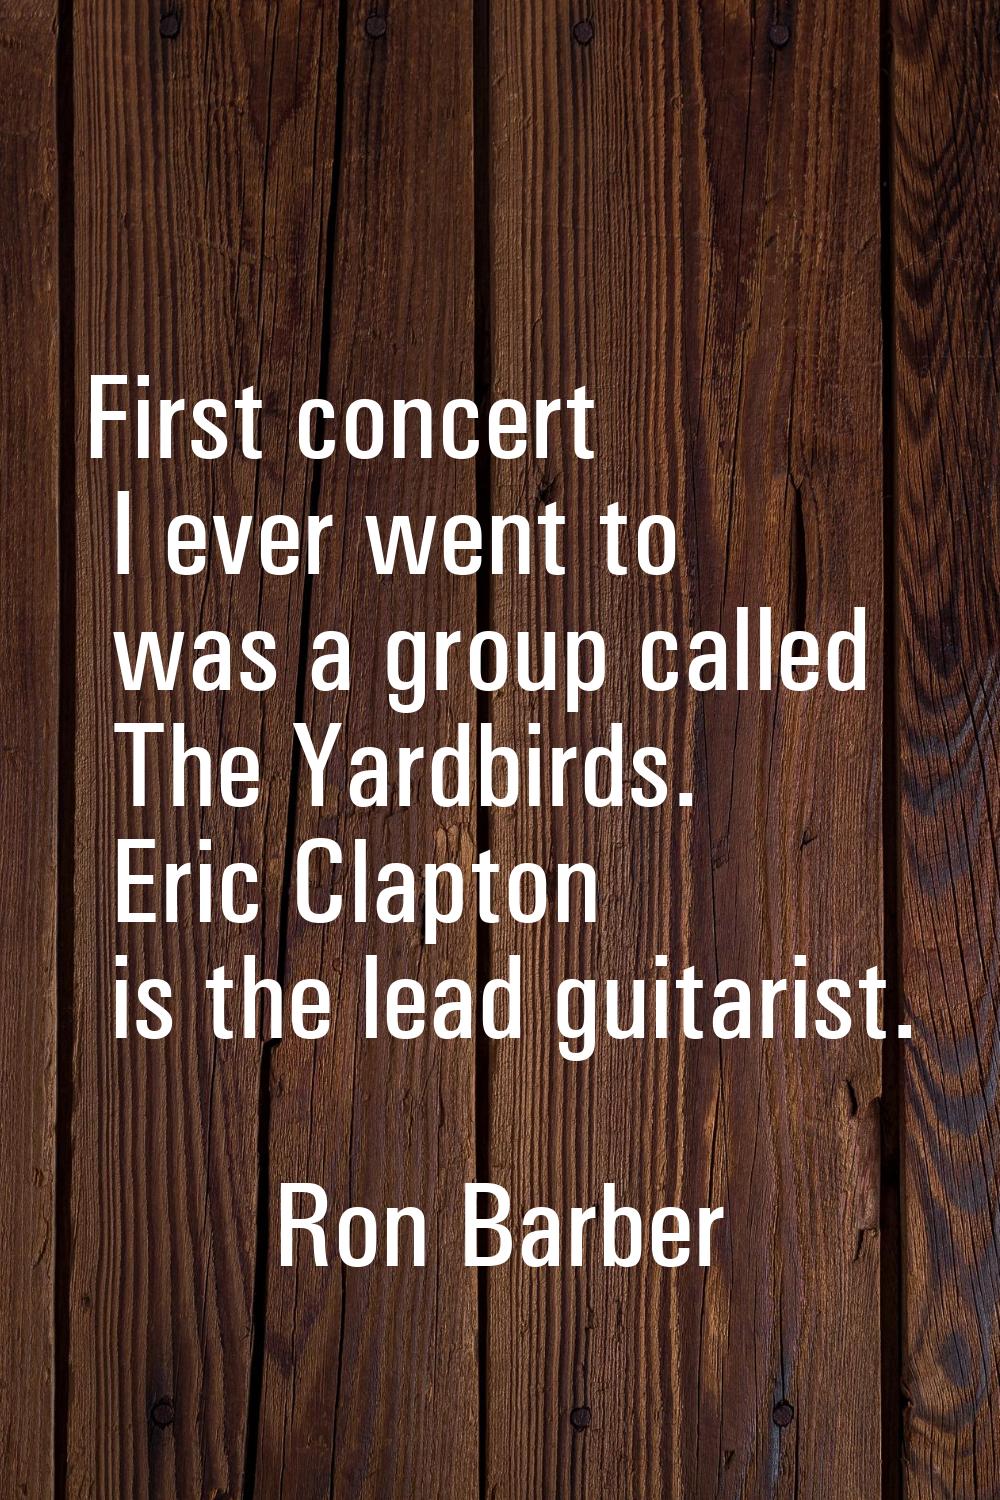 First concert I ever went to was a group called The Yardbirds. Eric Clapton is the lead guitarist.